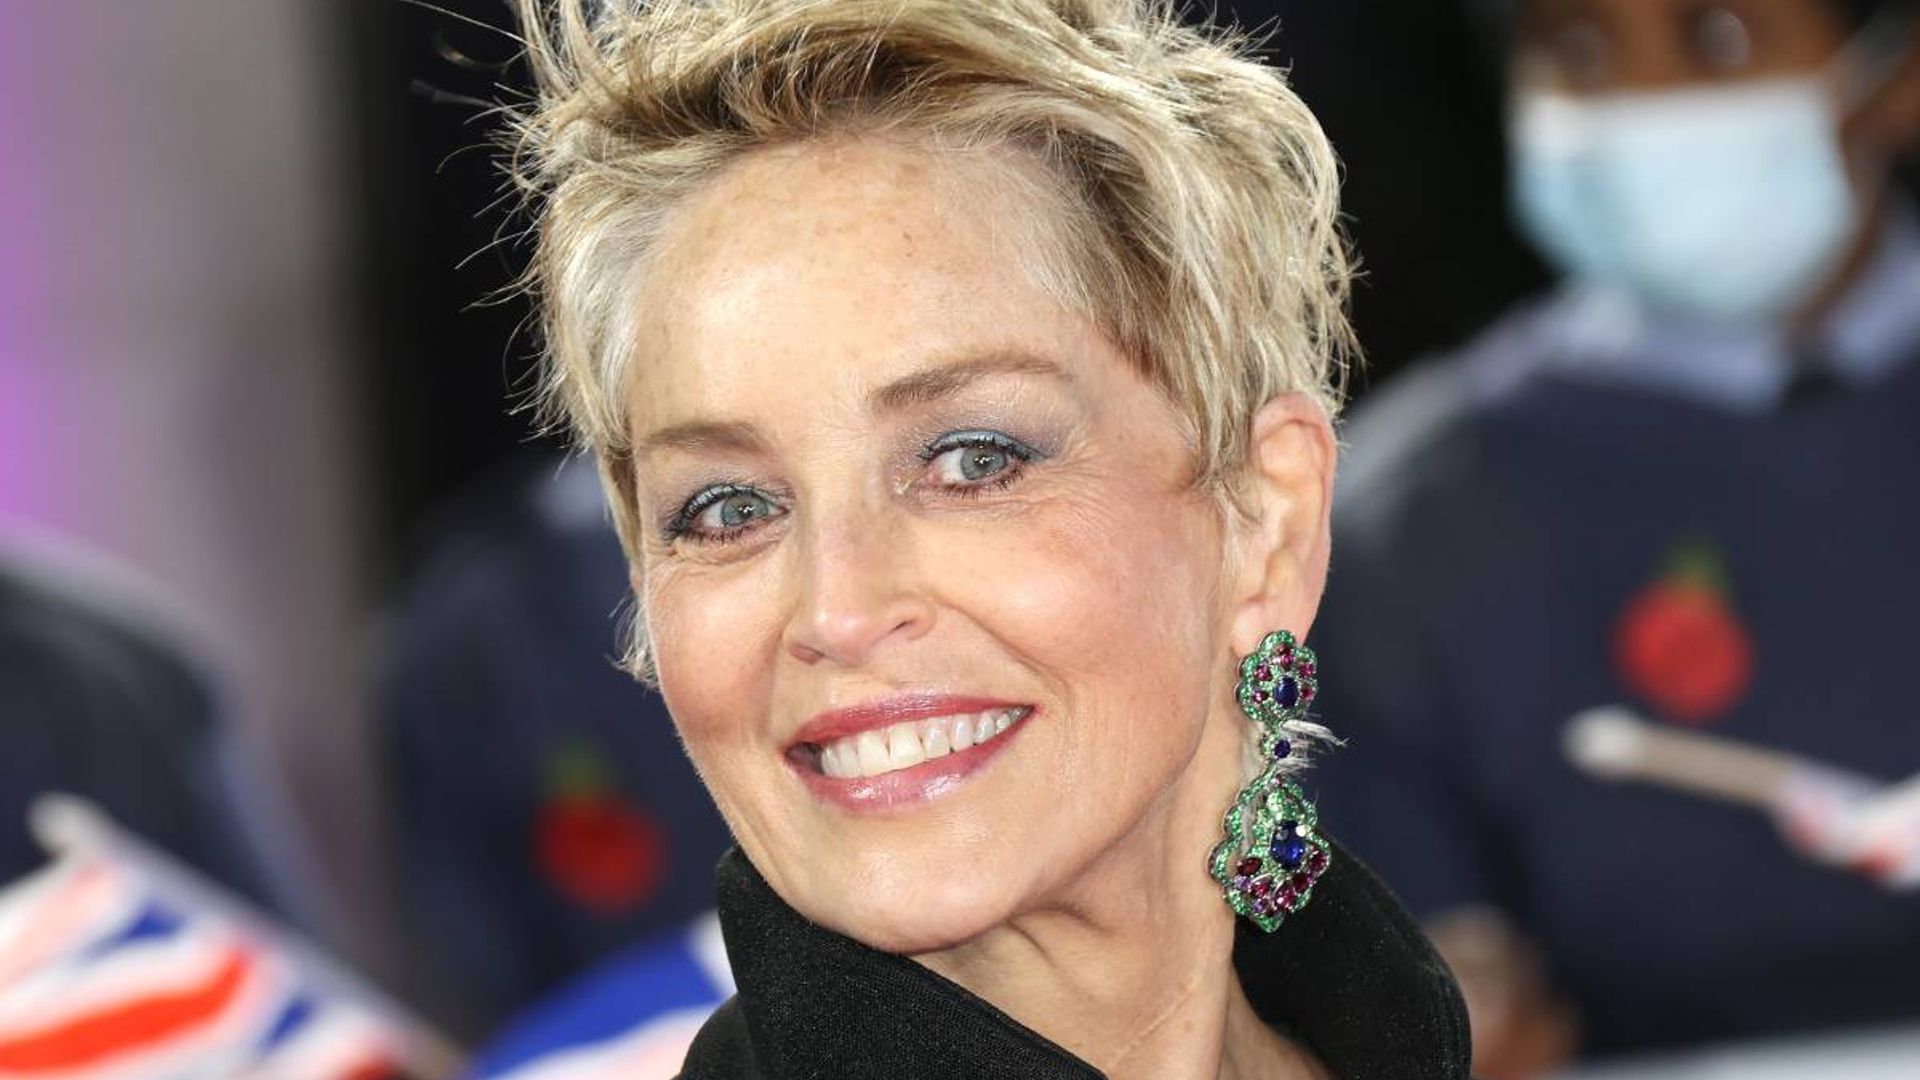 Sharon Stone turns heads in dramatic black gown at the Pride of Britain Awards